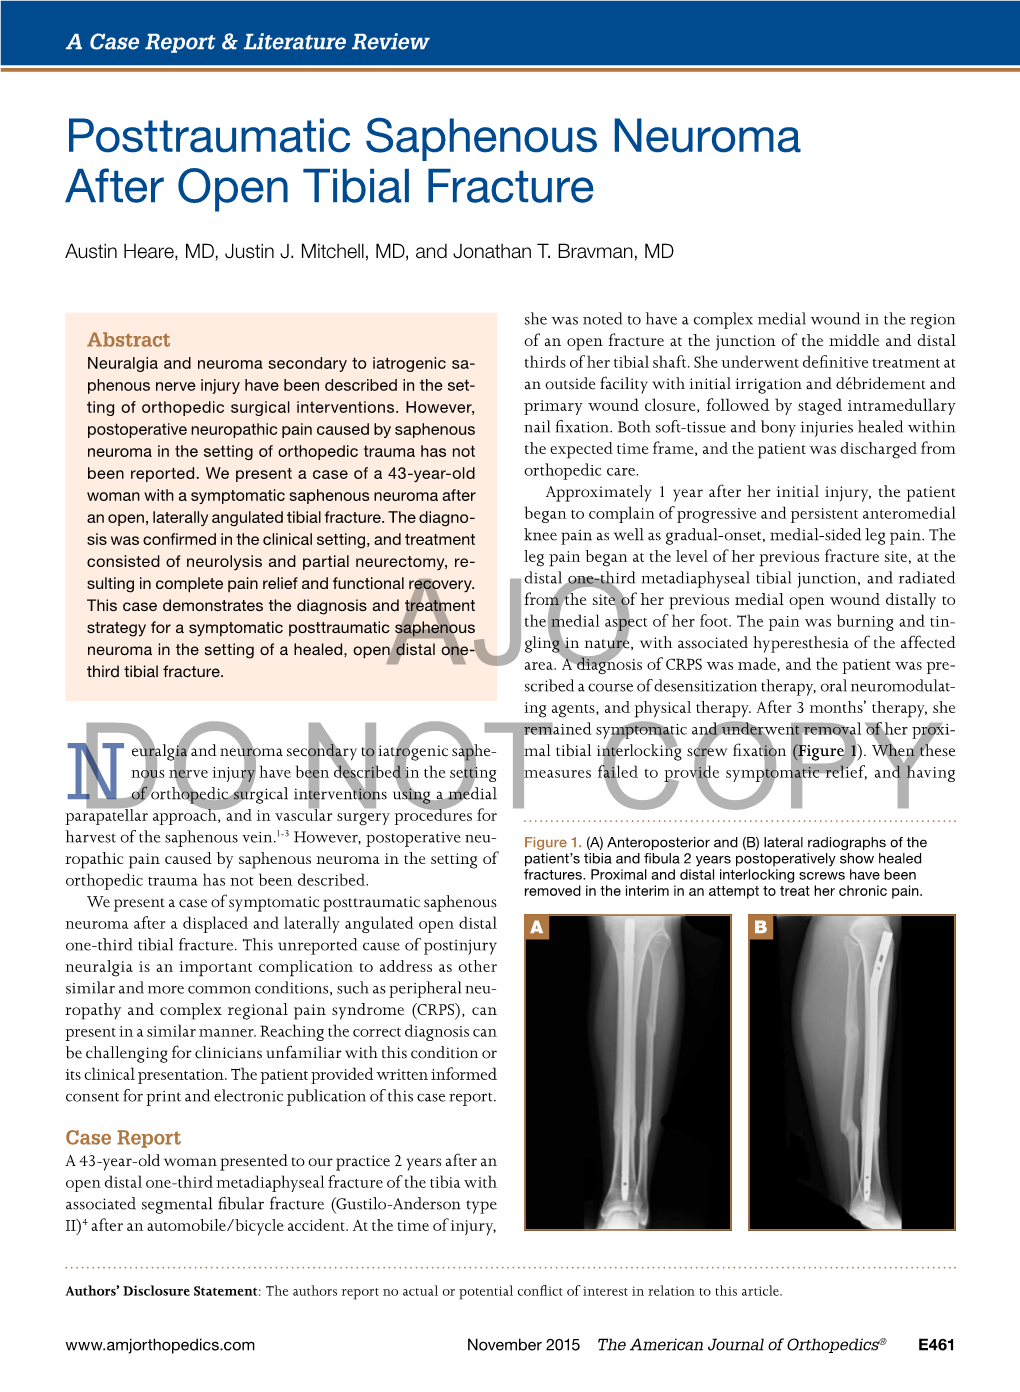 Posttraumatic Saphenous Neuroma After Open Tibial Fracture